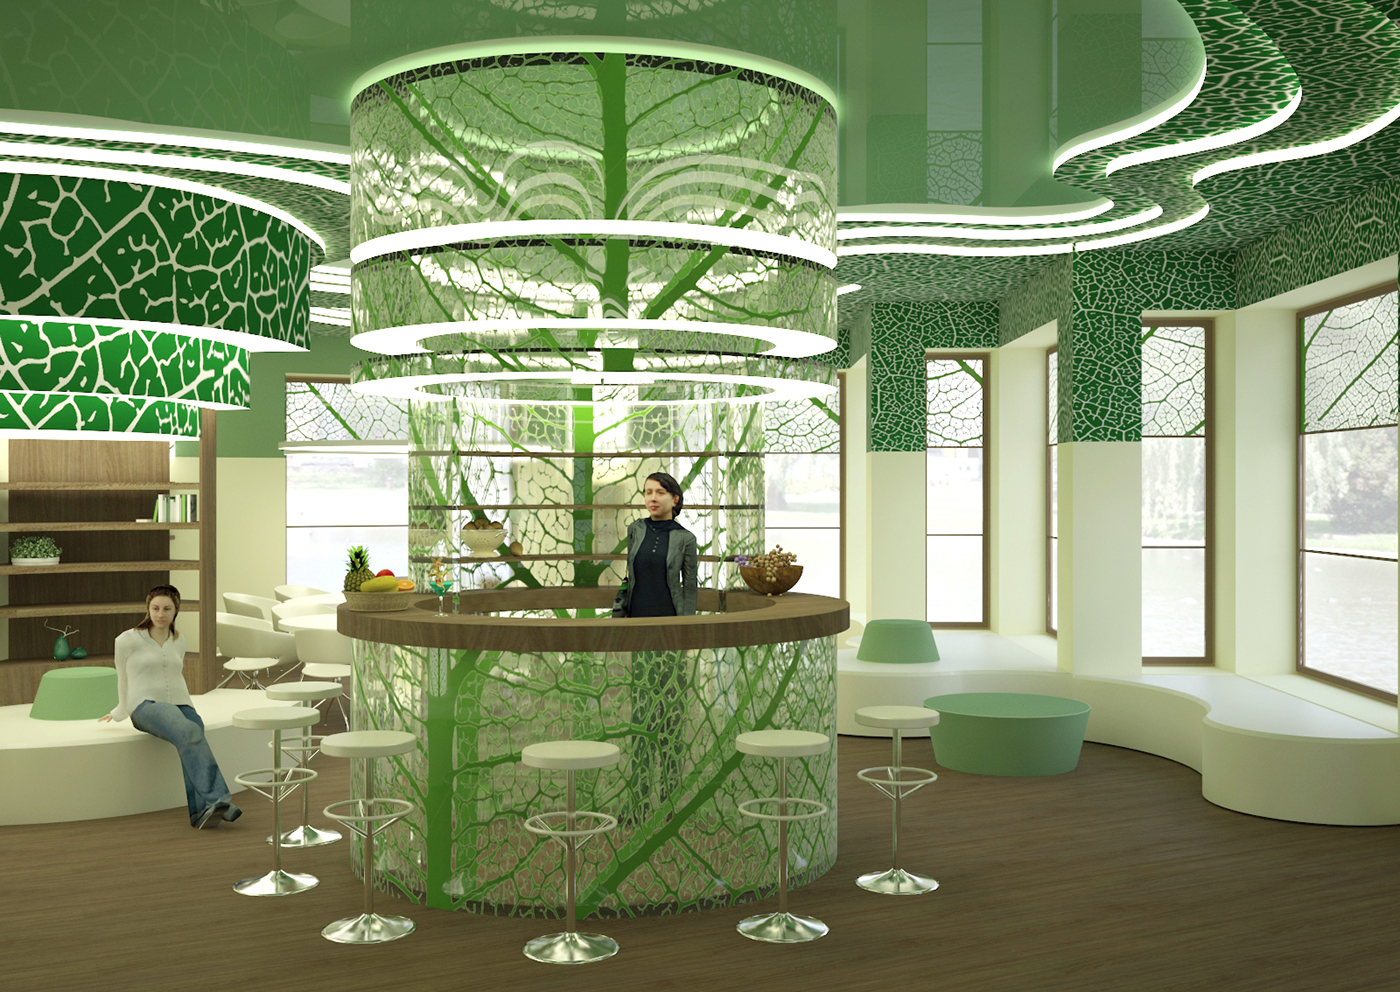 Project green study center club Nature leaf pattern Interior design